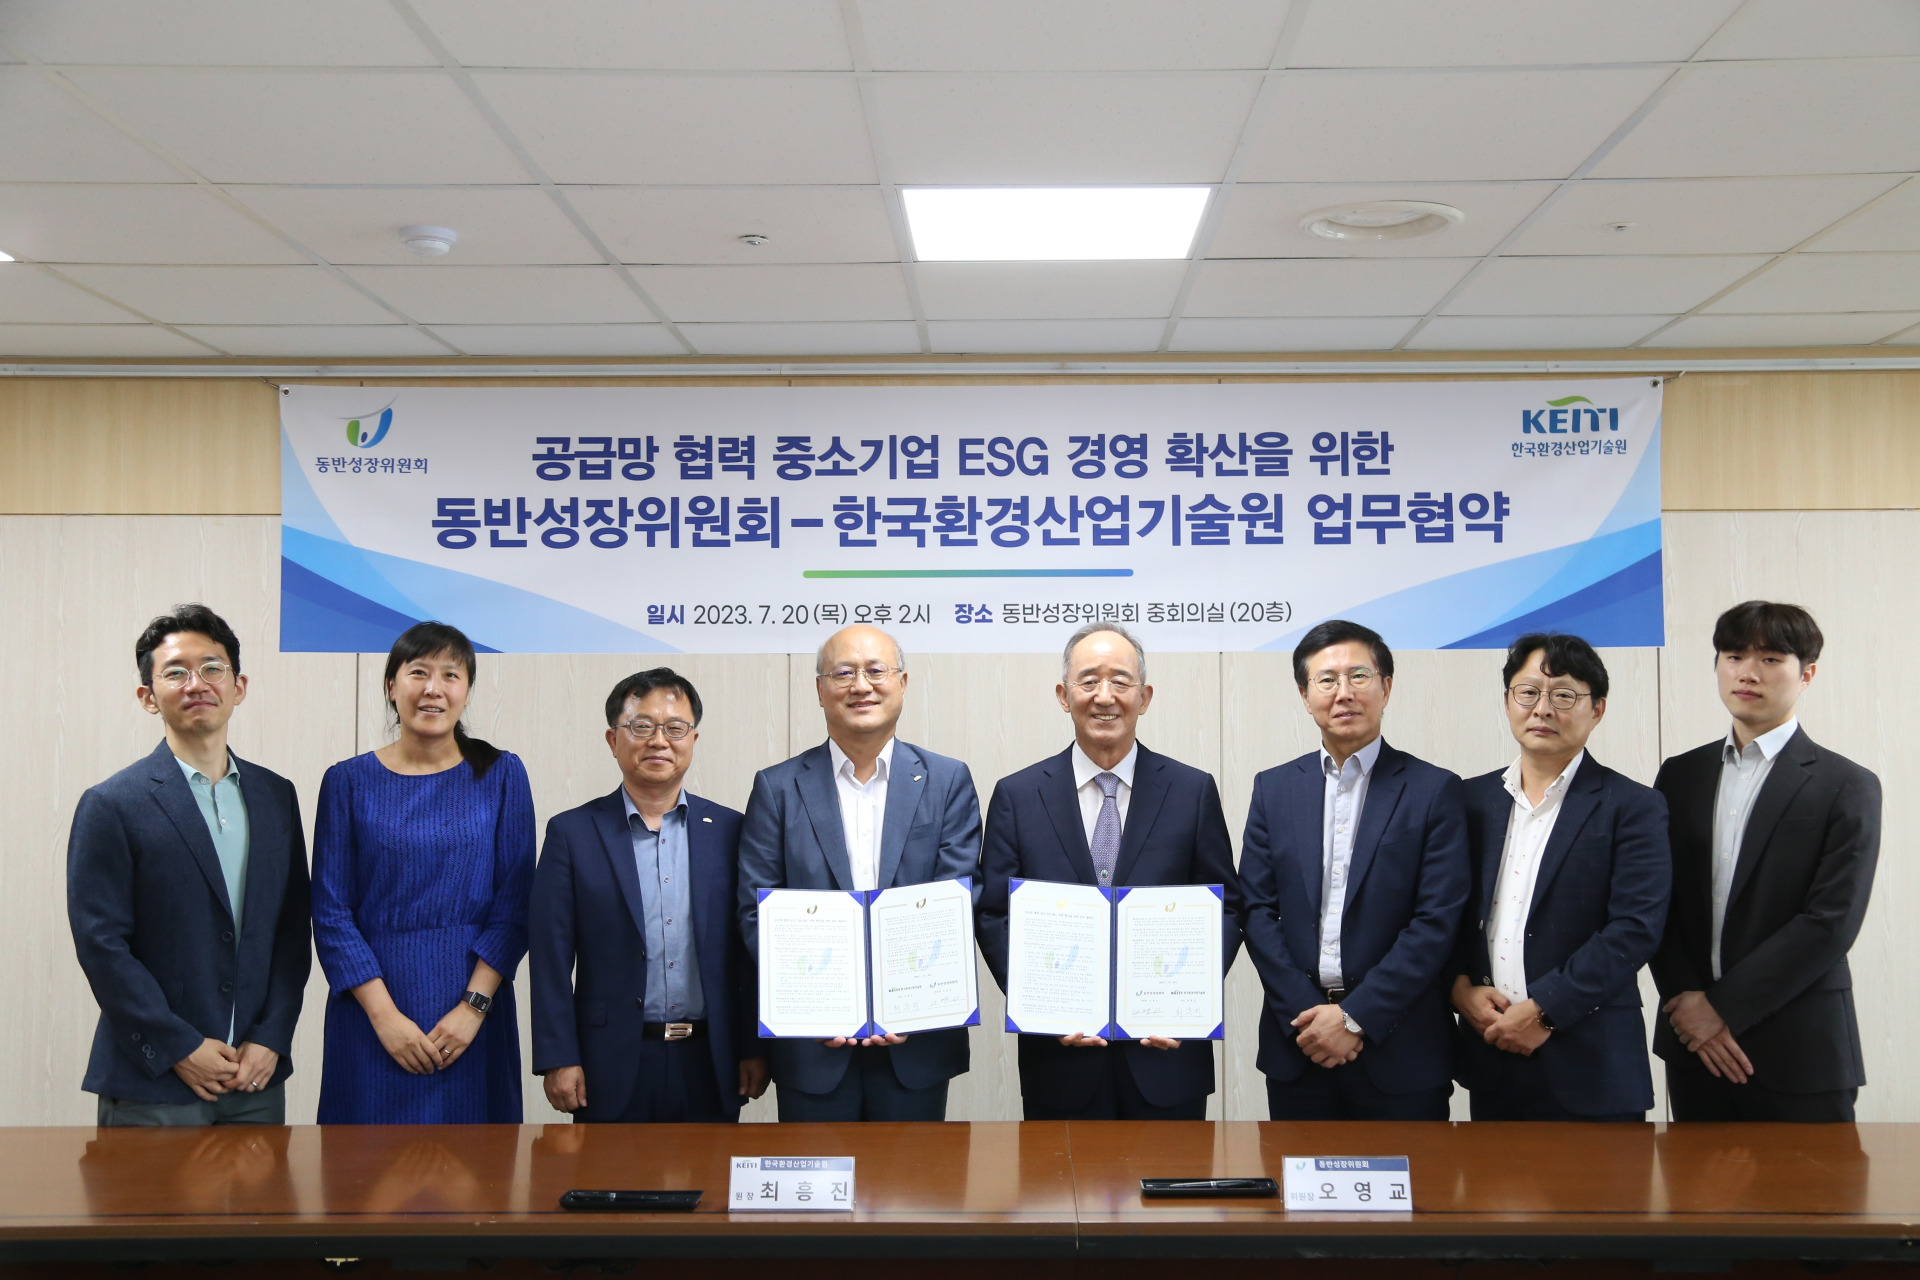 MOU to strengthen ESG competitiveness of SMEs in cooperation with supply chain